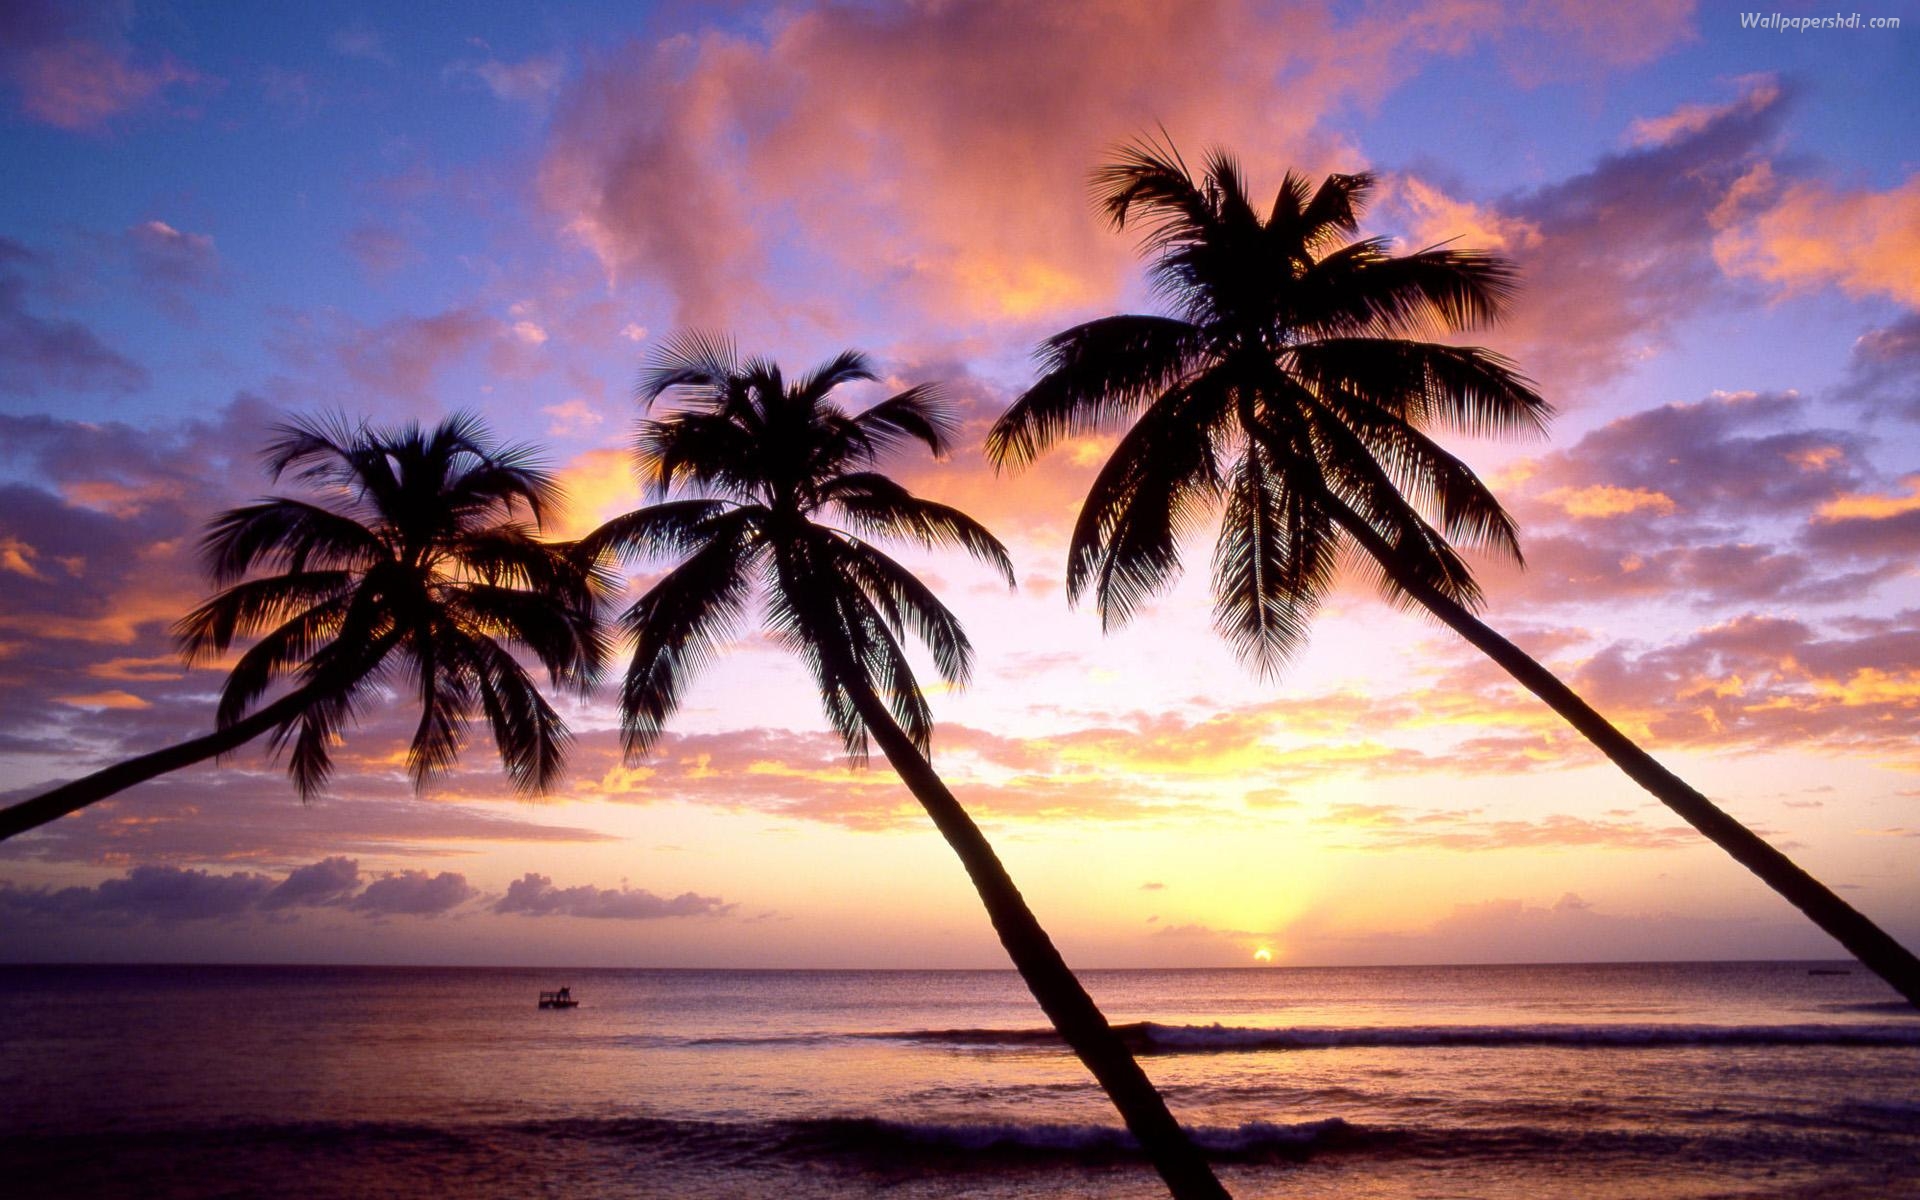 palm trees sunset images palm trees sunset pictures palm trees